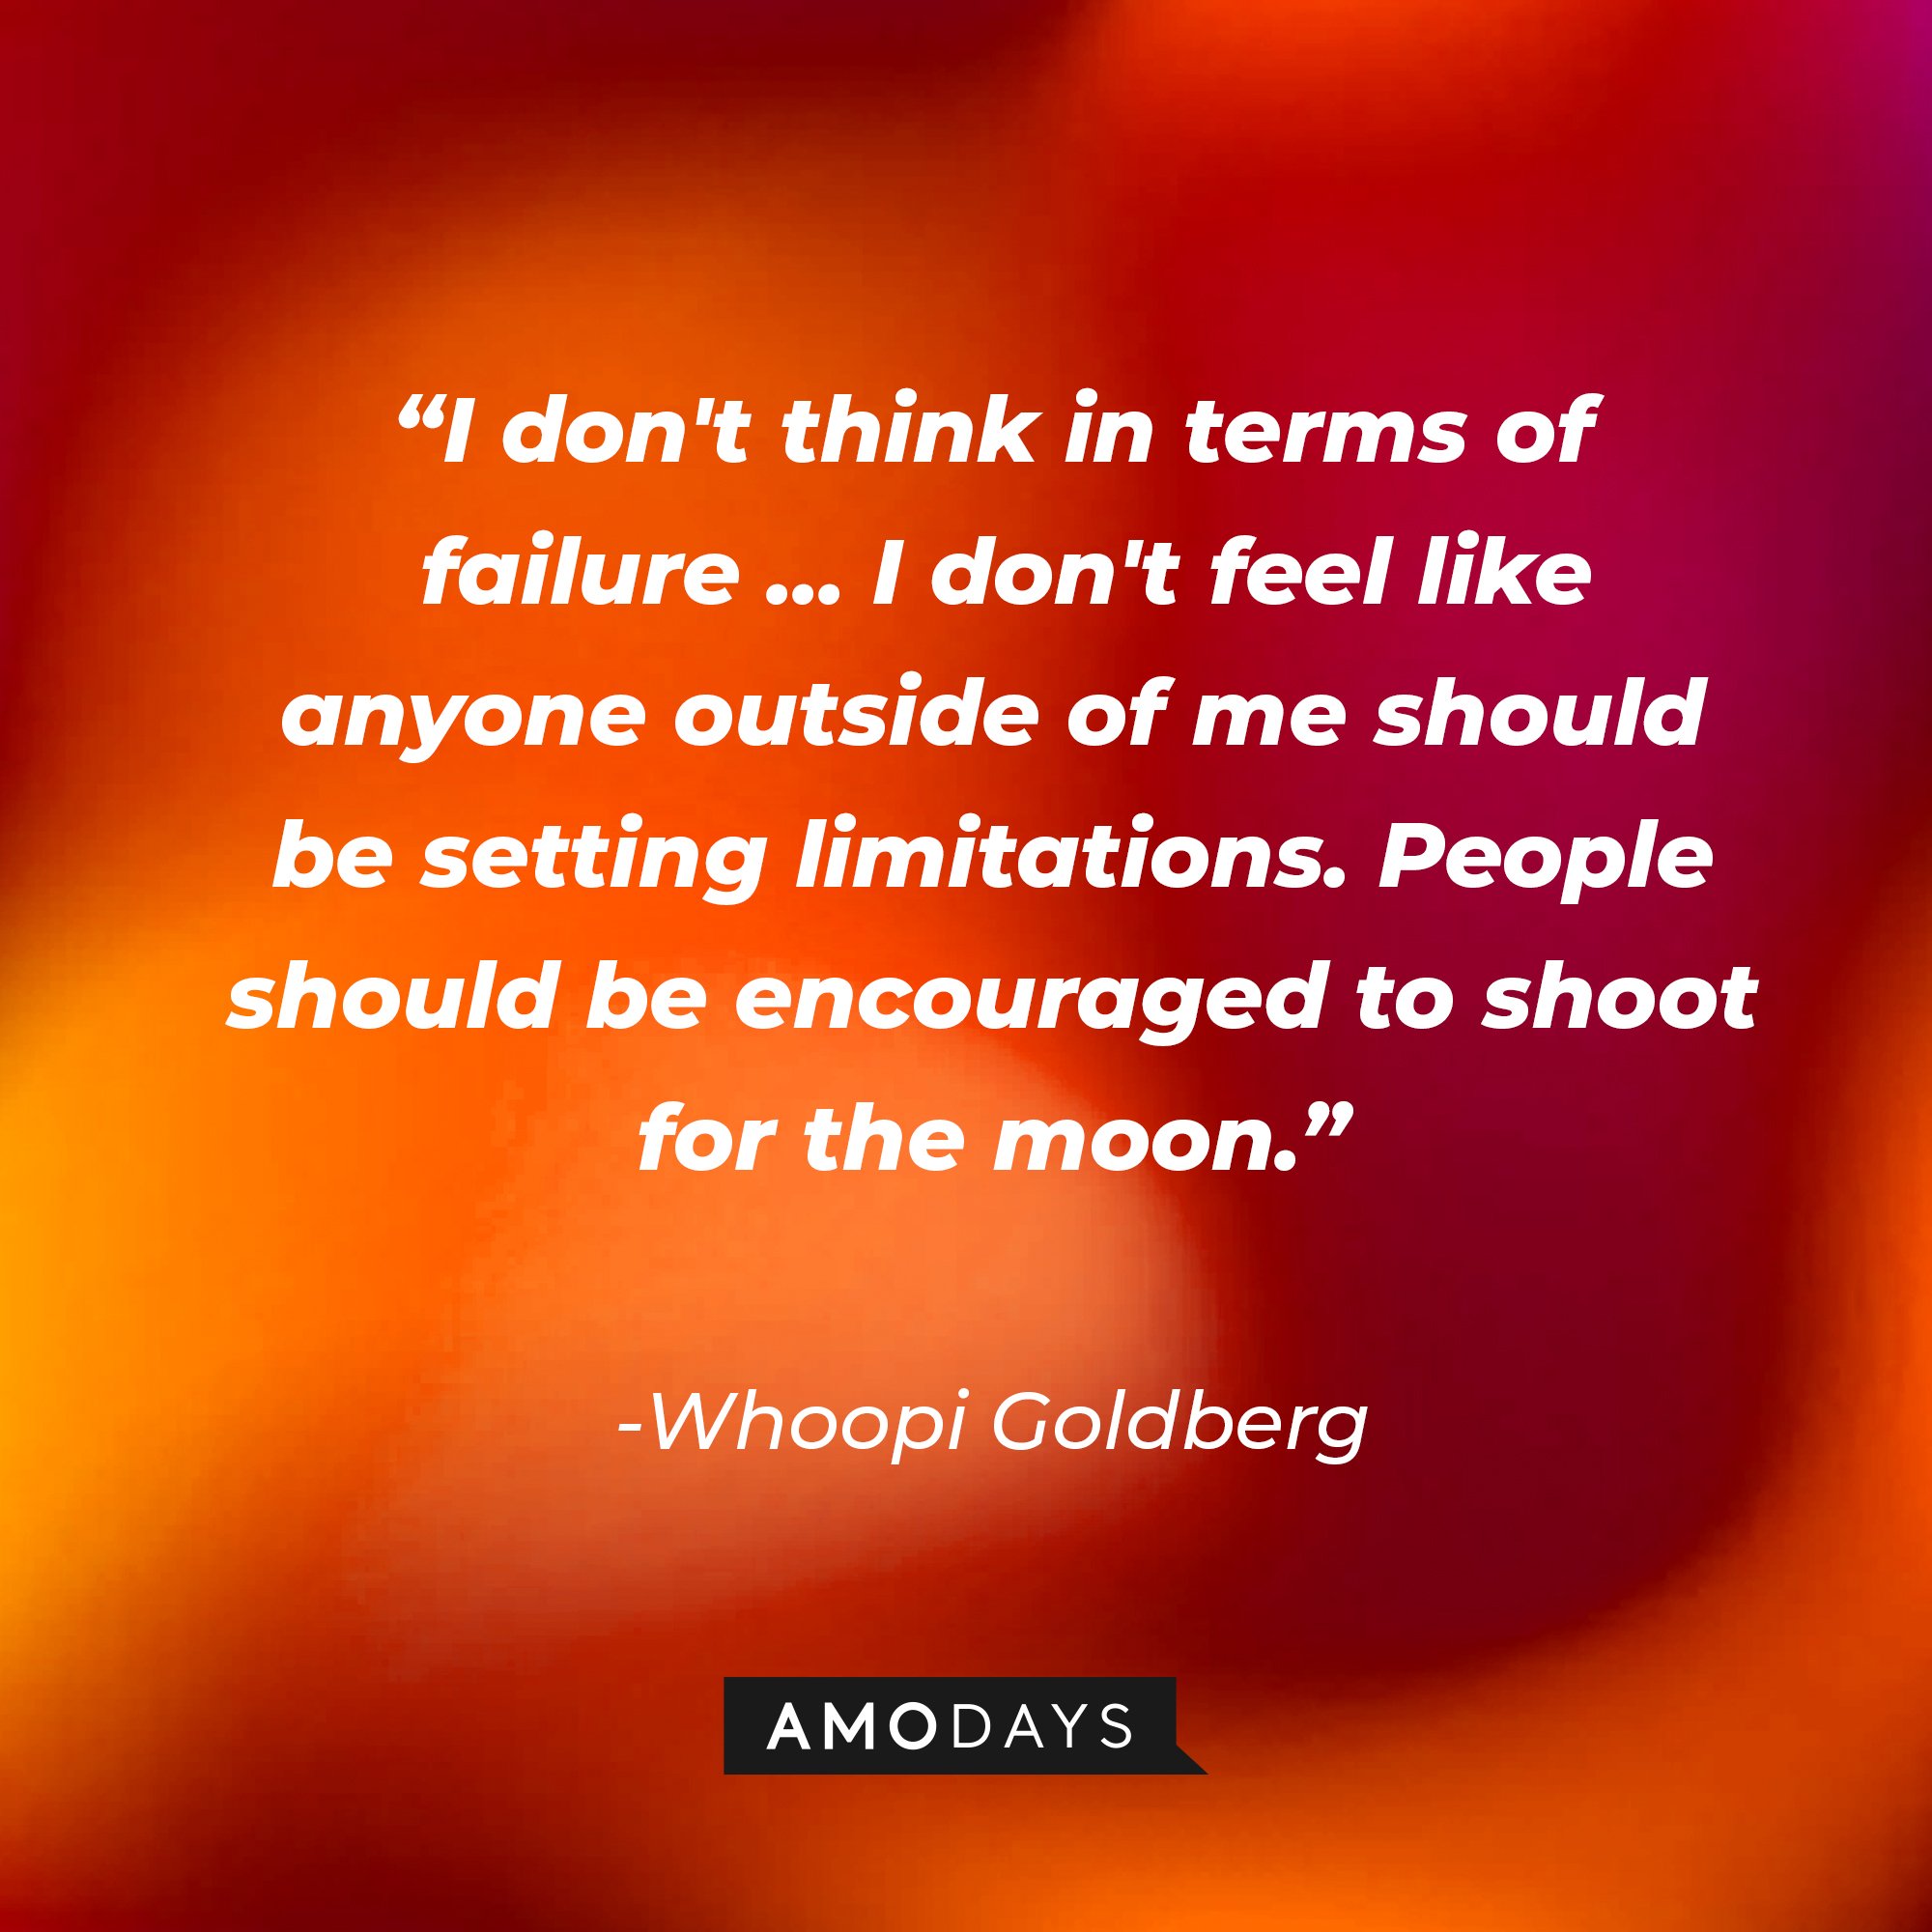 Whoopi Goldberg's quote: “I don't think in terms of failure....I don't feel like anyone outside of me should be setting limitations. People should be encouraged to shoot for the moon.” | Image: AmoDays